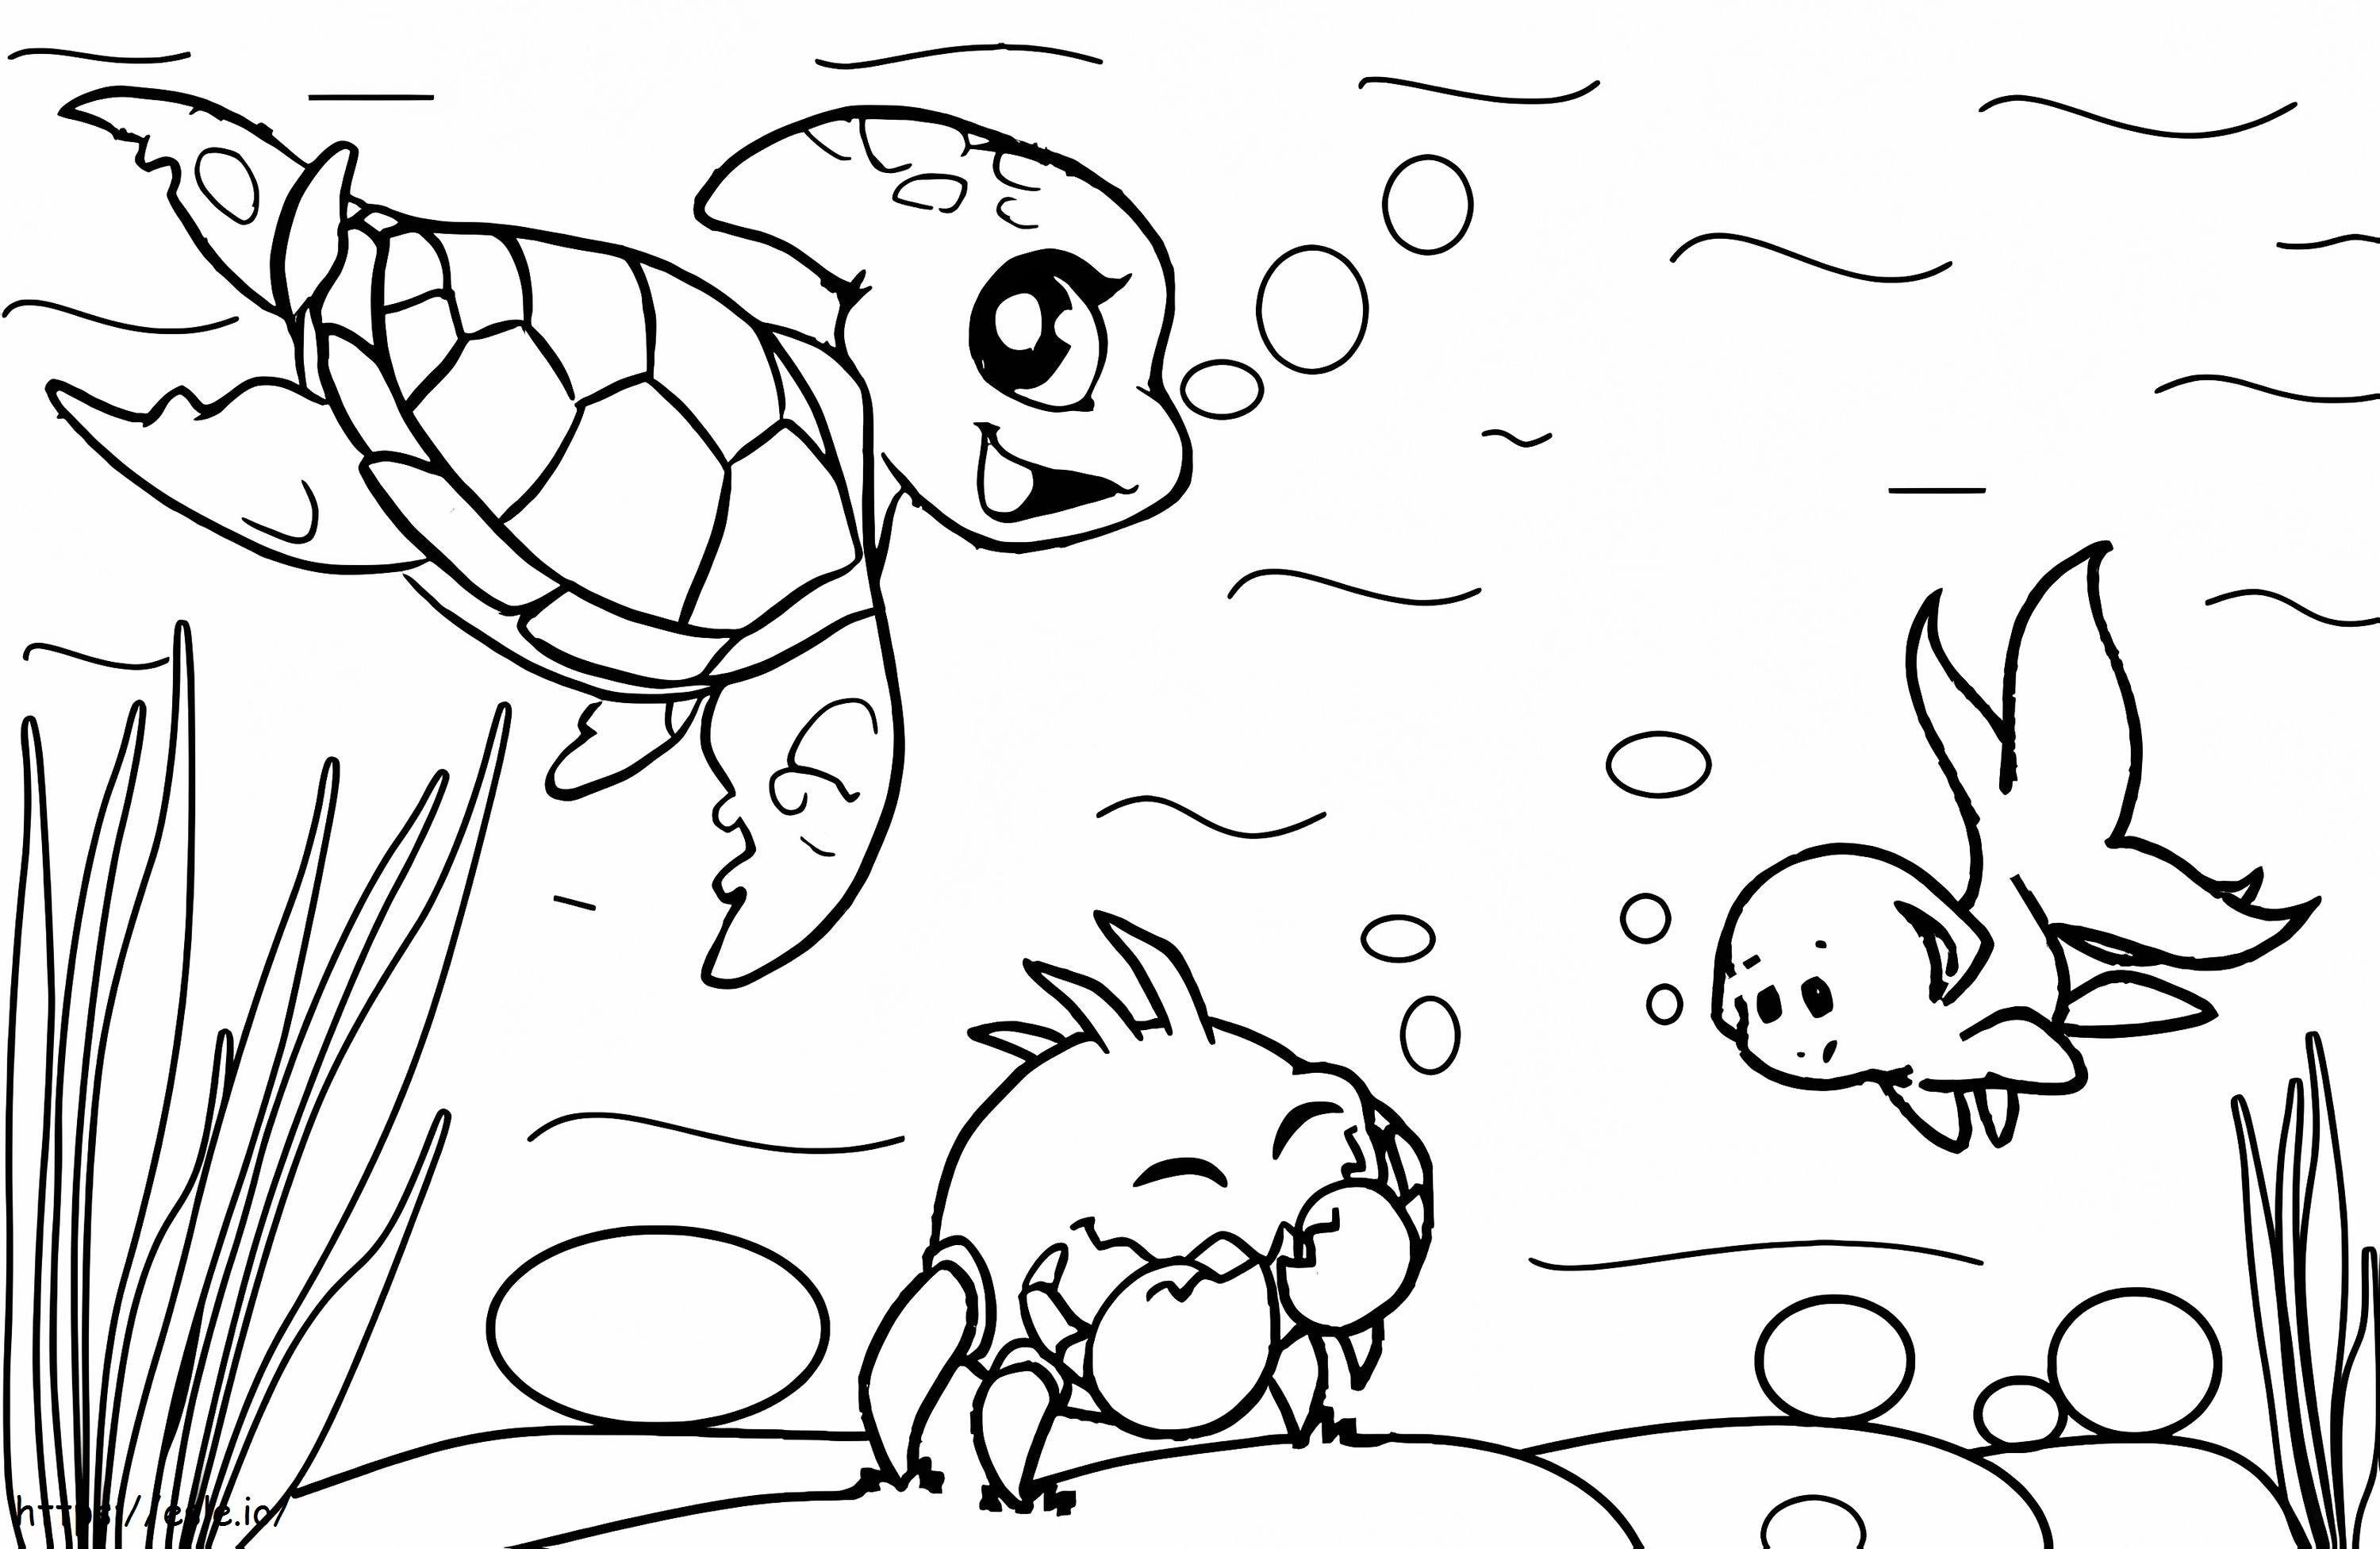 Neopets 20 coloring page